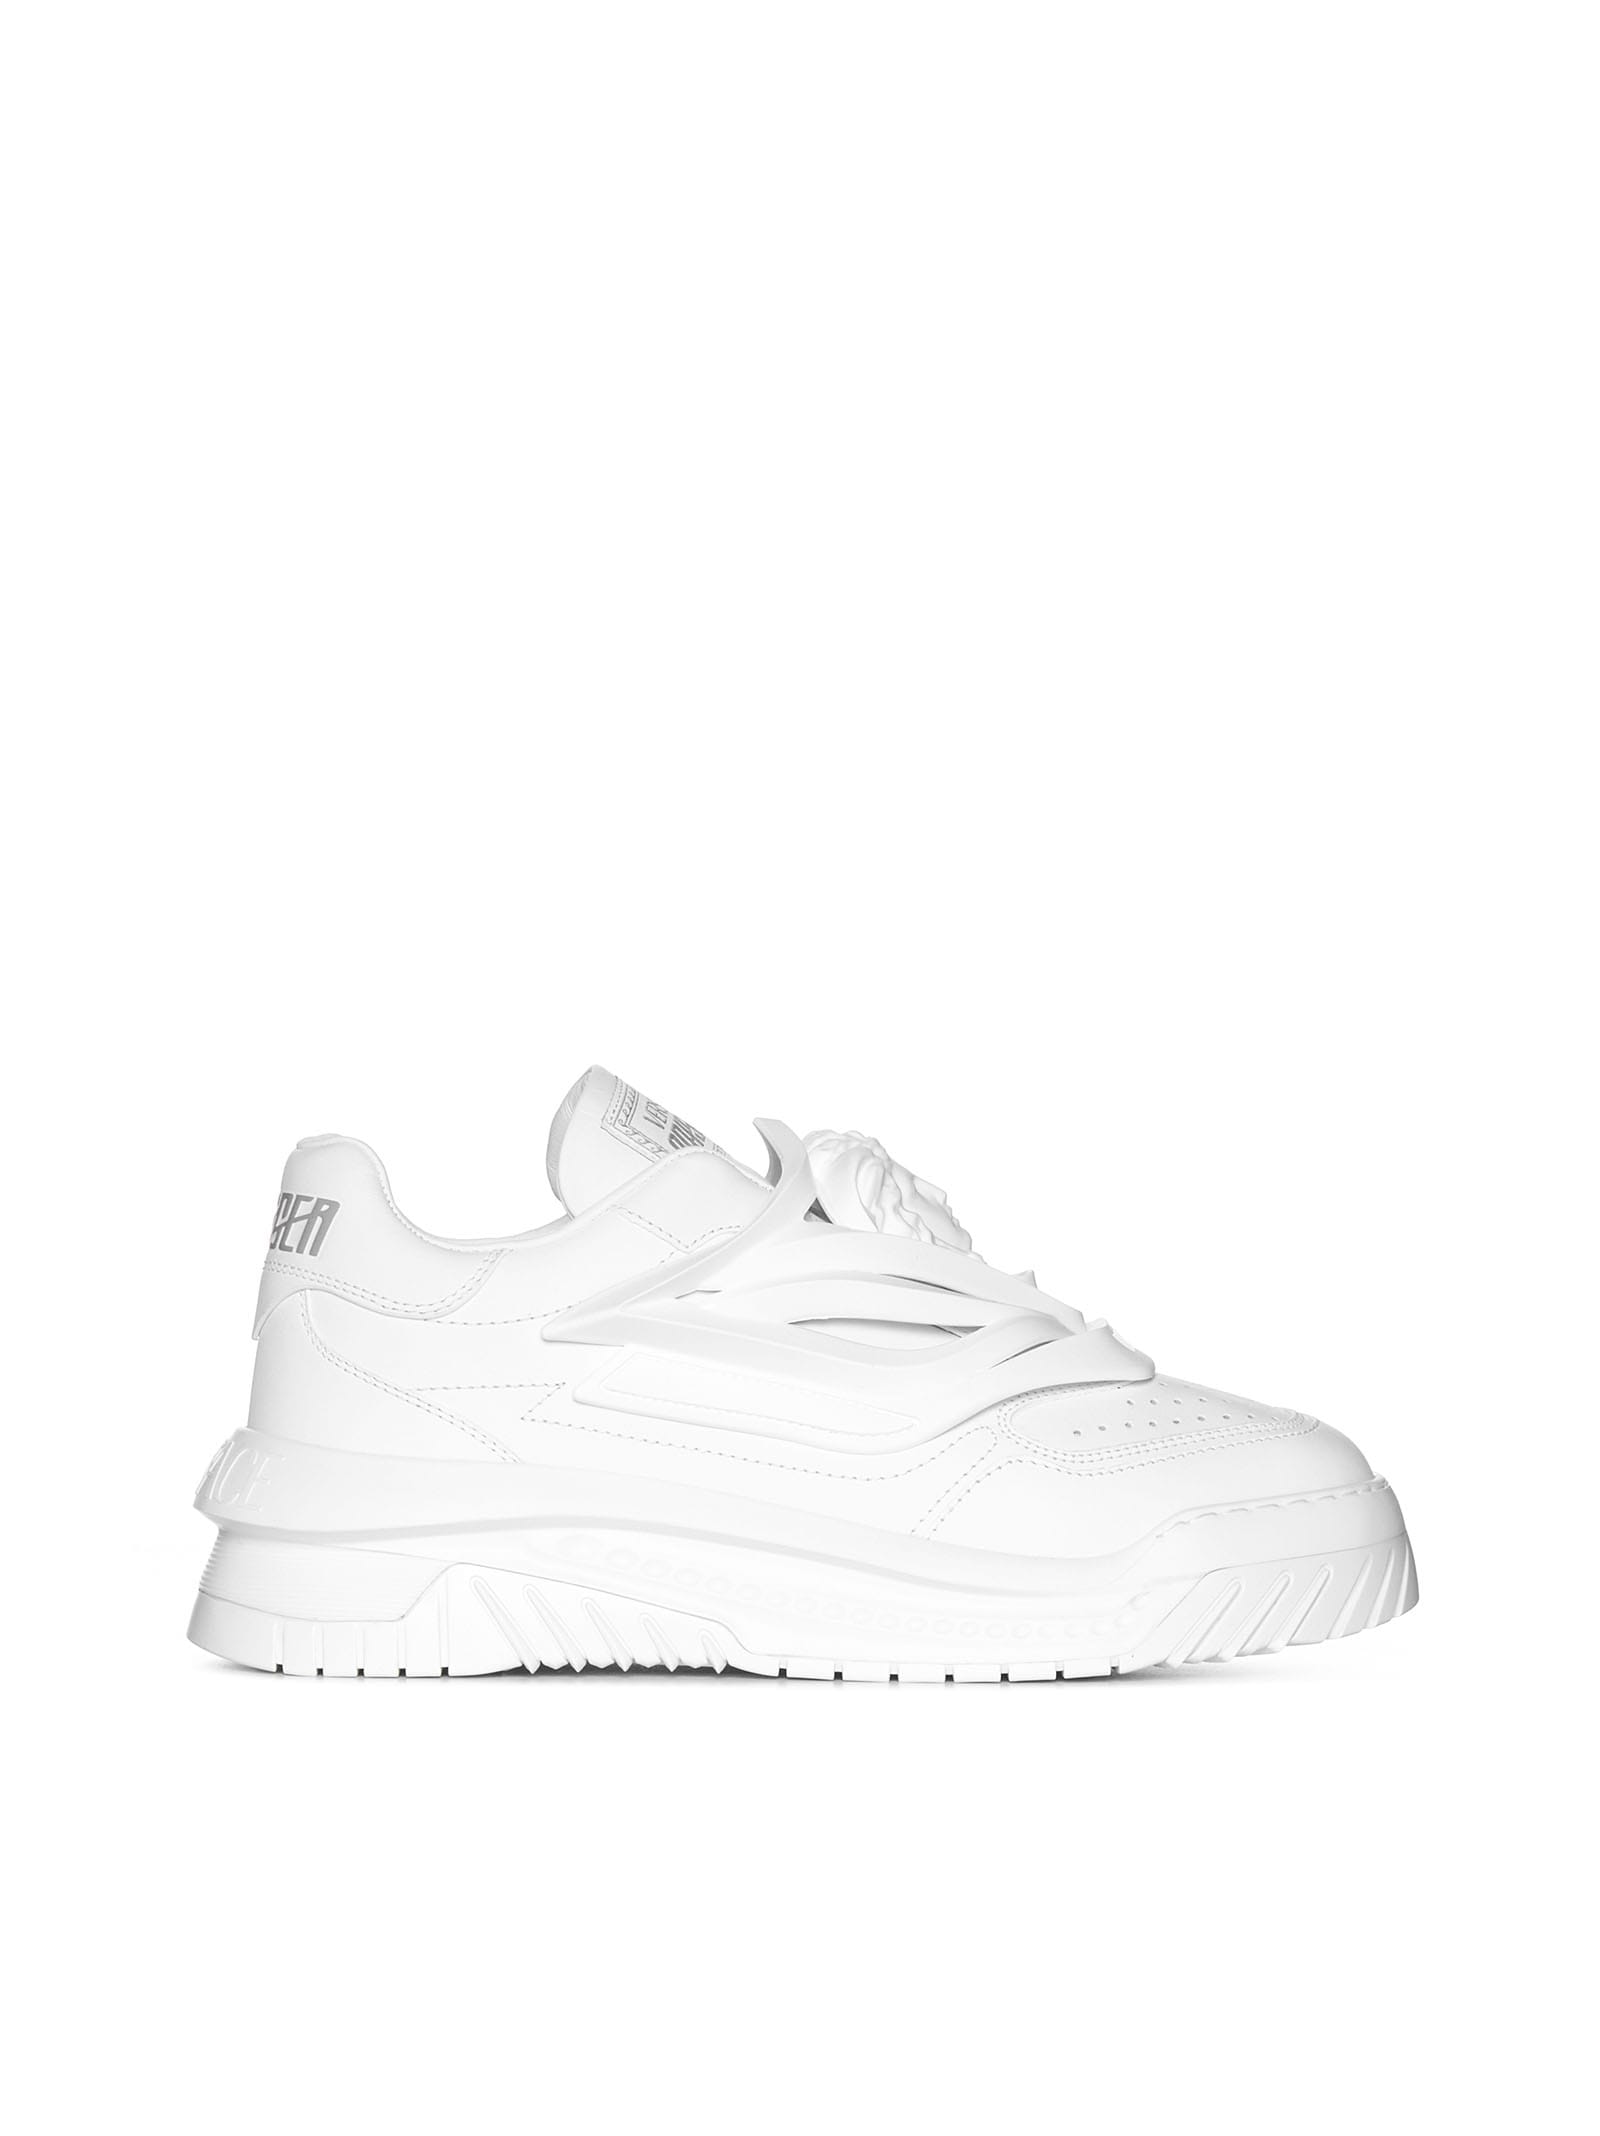 VERSACE WHITE ODISSEA SNEAKERS